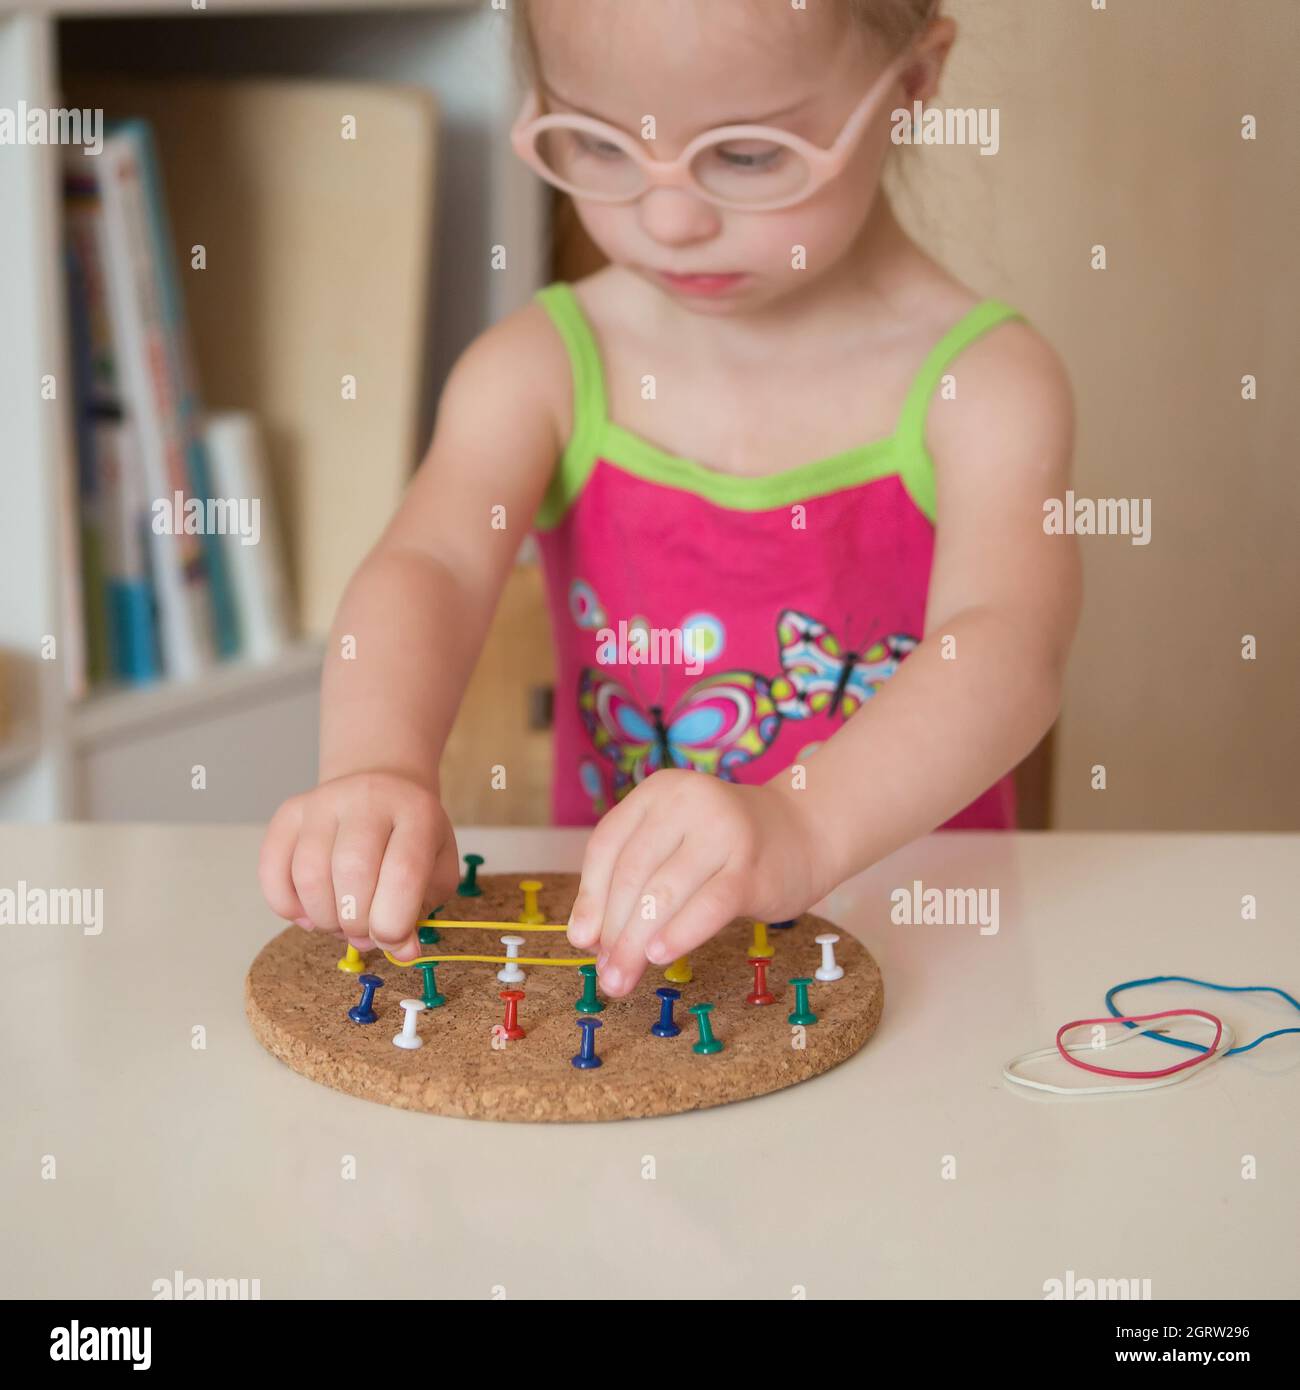 Girl with Down syndrome develops fine motor skills of hands Stock Photo